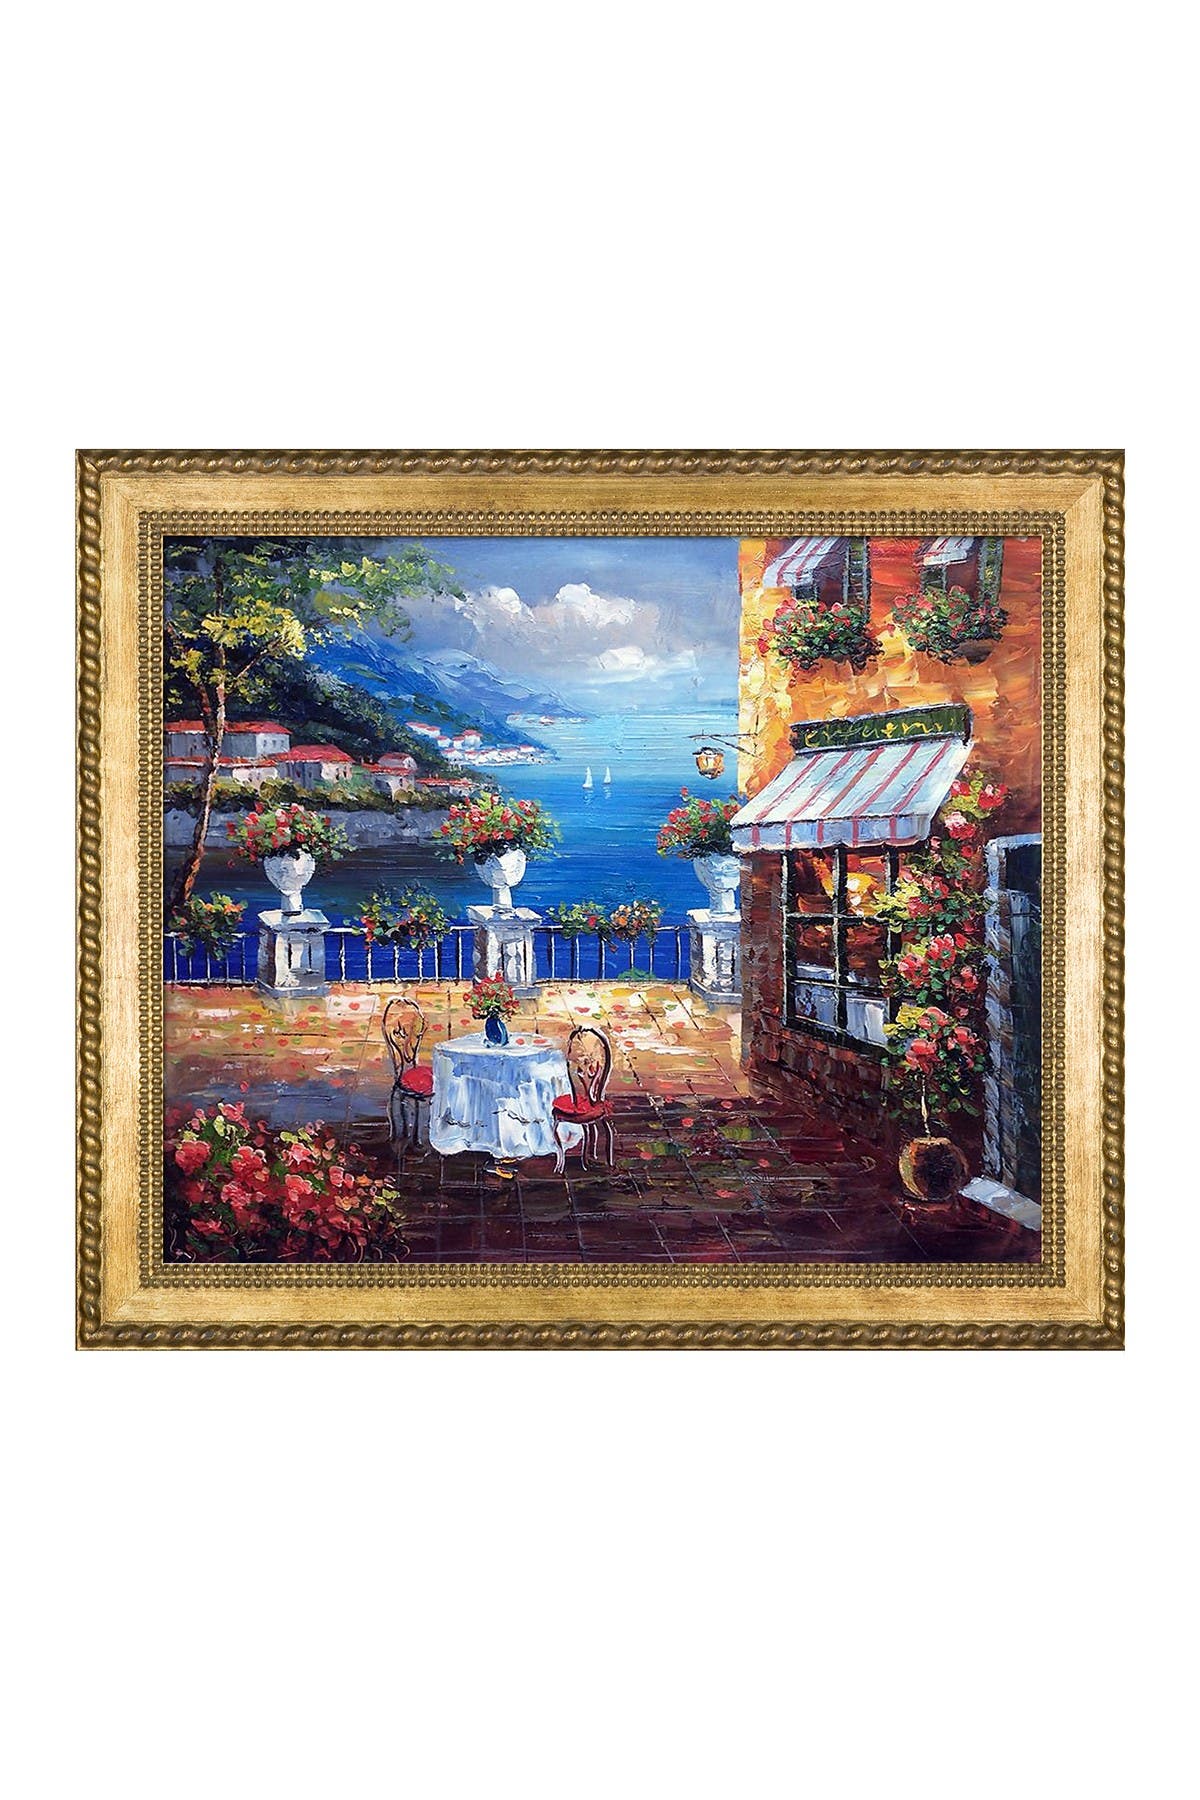 overstockArt Vacation Harbor by Unknown Artists Framed Hand Painted Oil on Canvas 